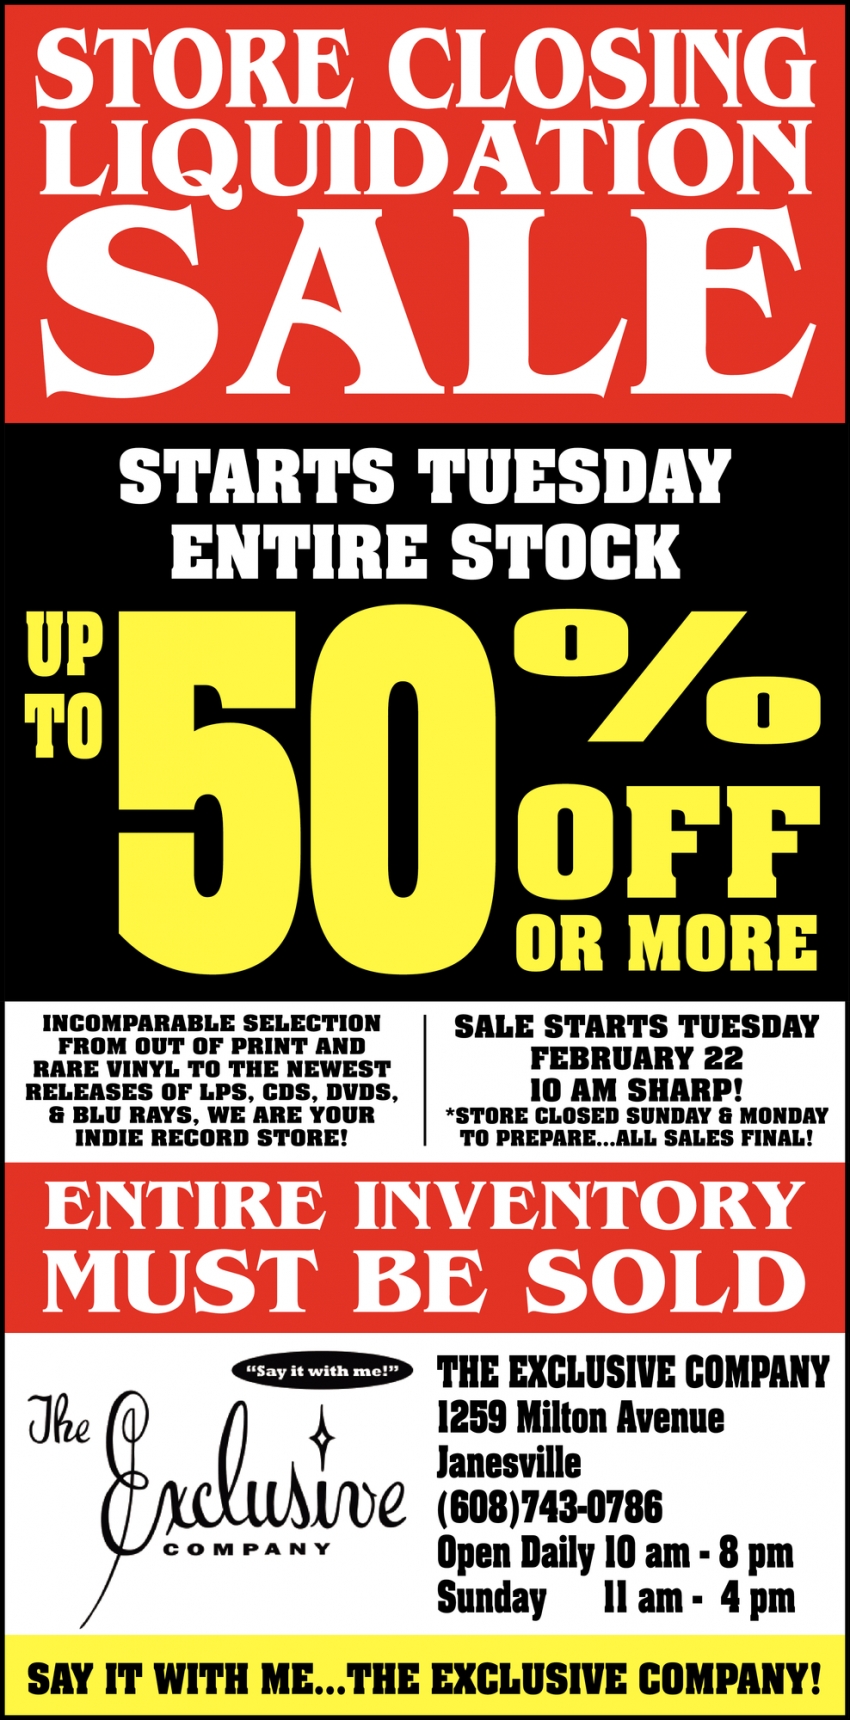 Tuesday Morning Is Closing All Stores: Liquidation Sales Happening Now -  The Krazy Coupon Lady